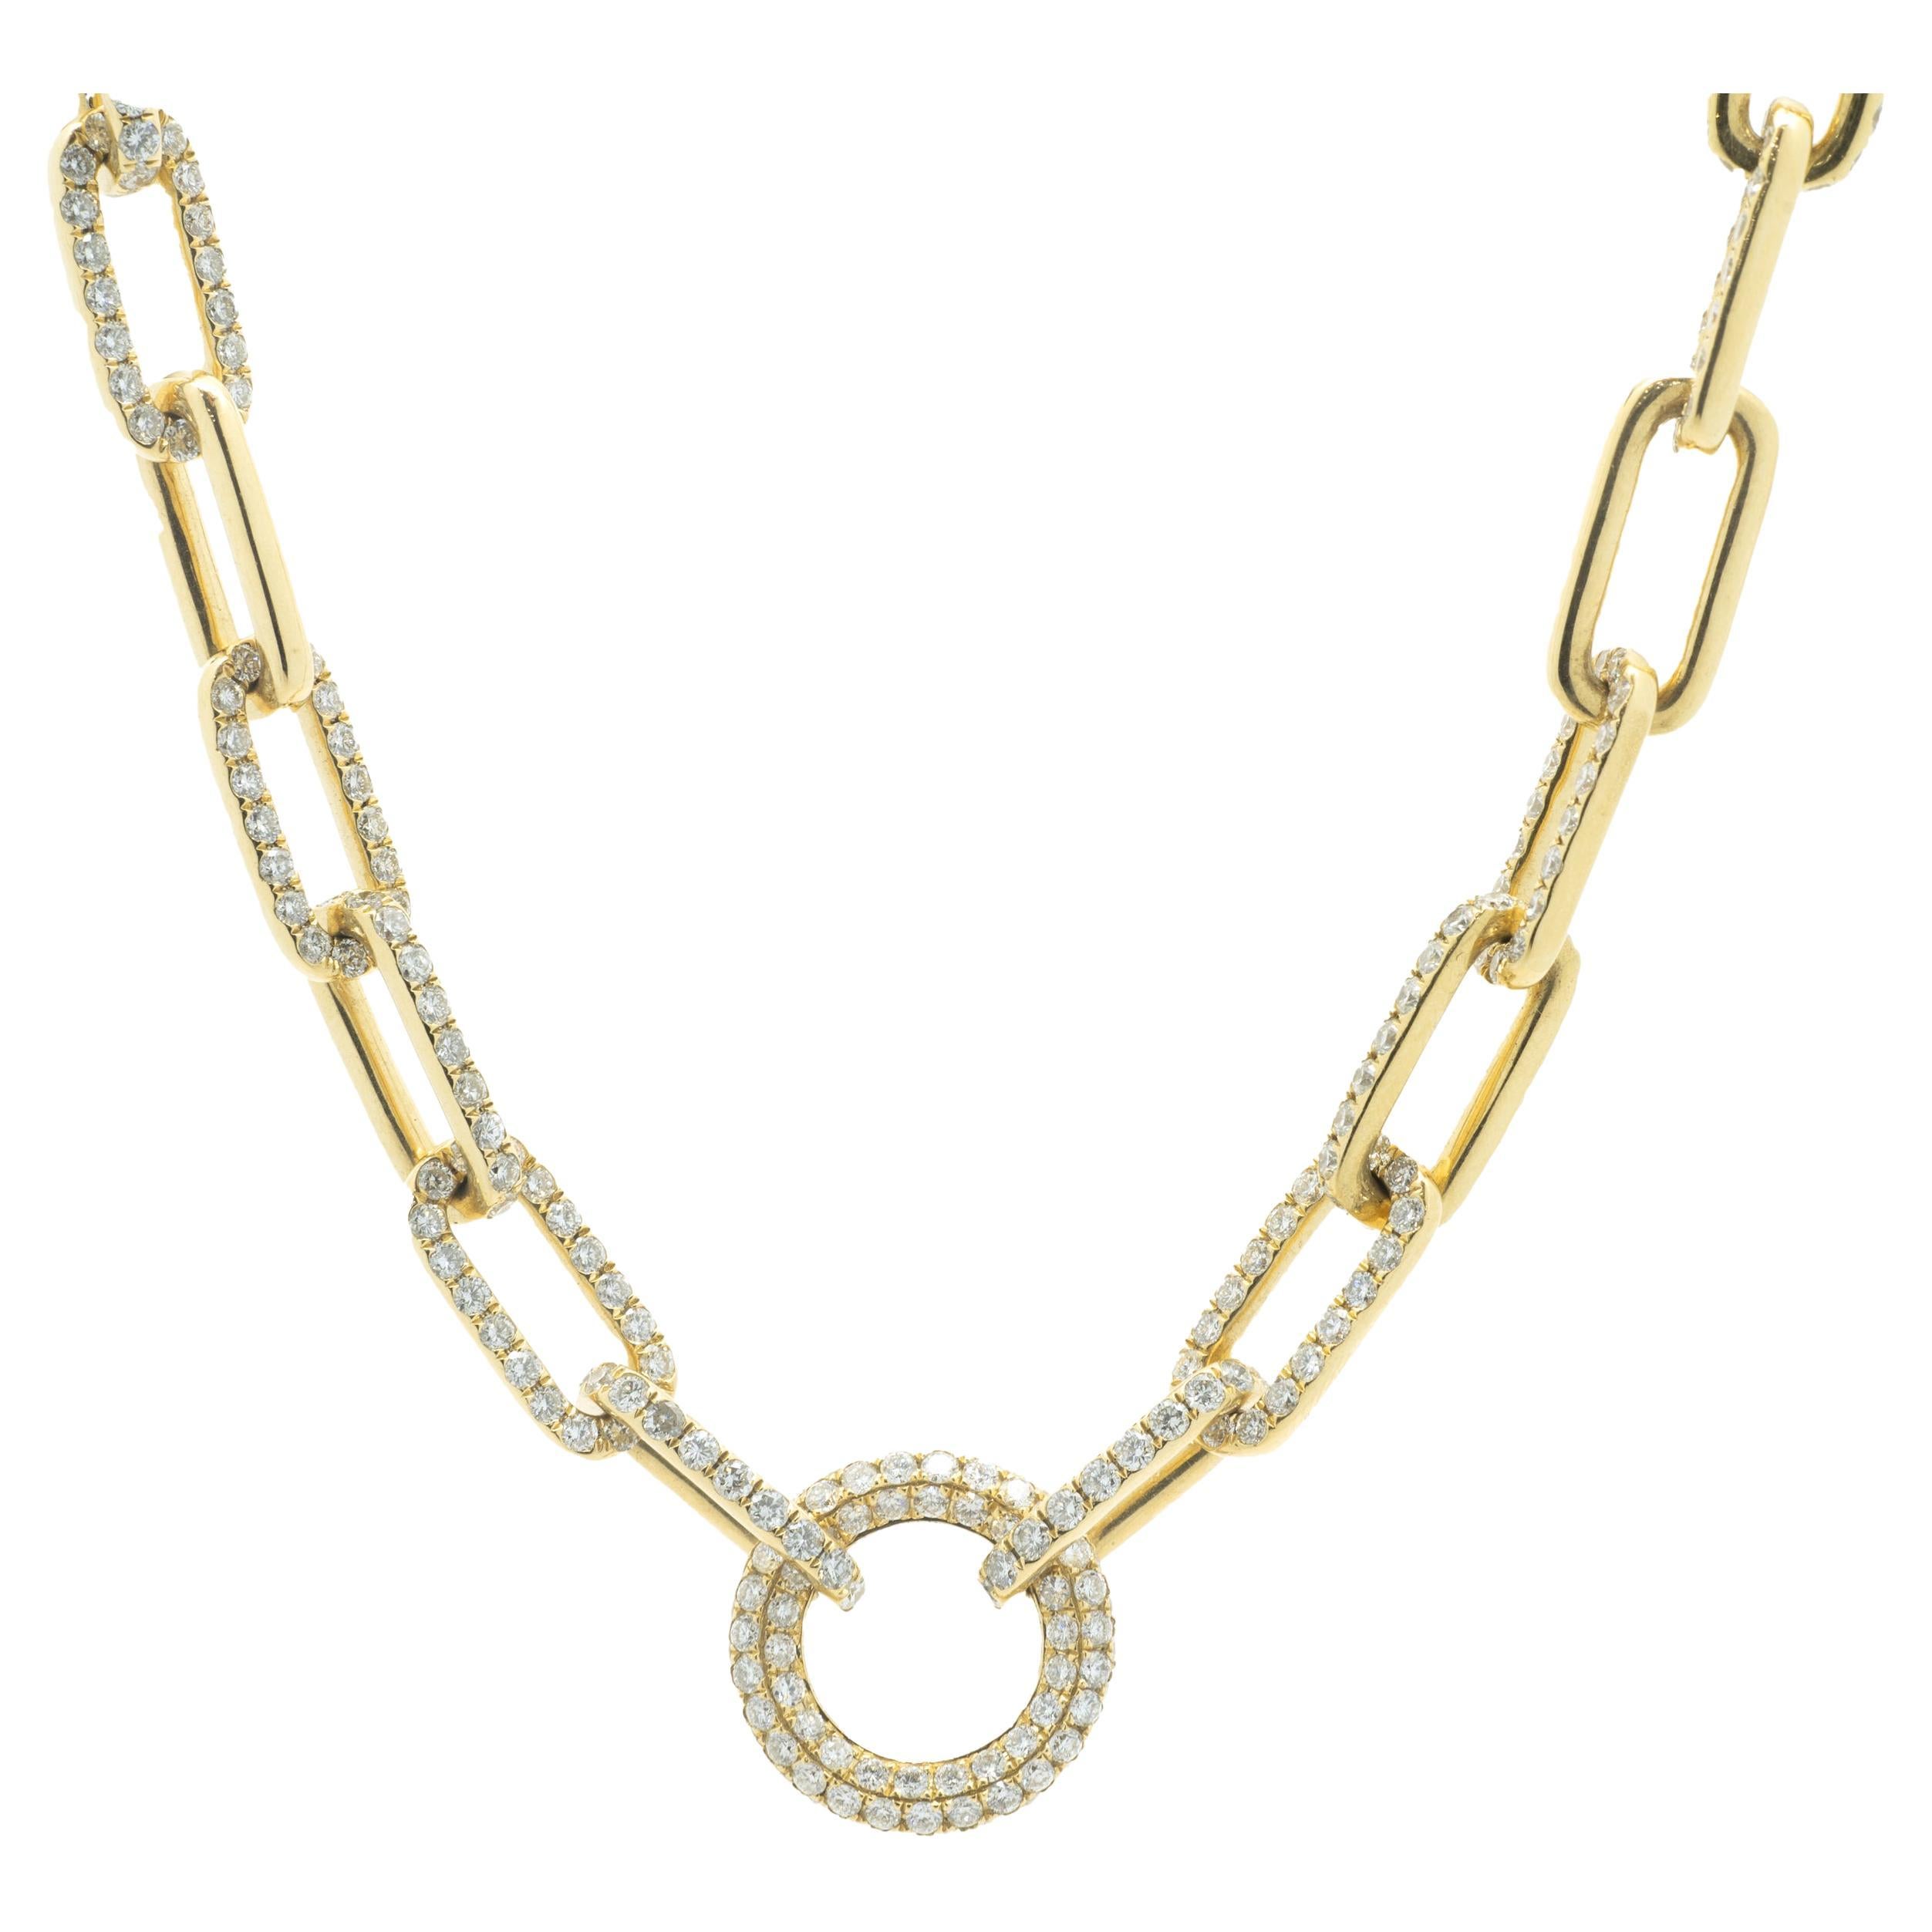 Bloomingdale's Diamond Accent Paperclip Necklace In 14k White & Yellow  Gold, 0.05 ct. t.w. - 100% Exclusive | Bloomingdale's